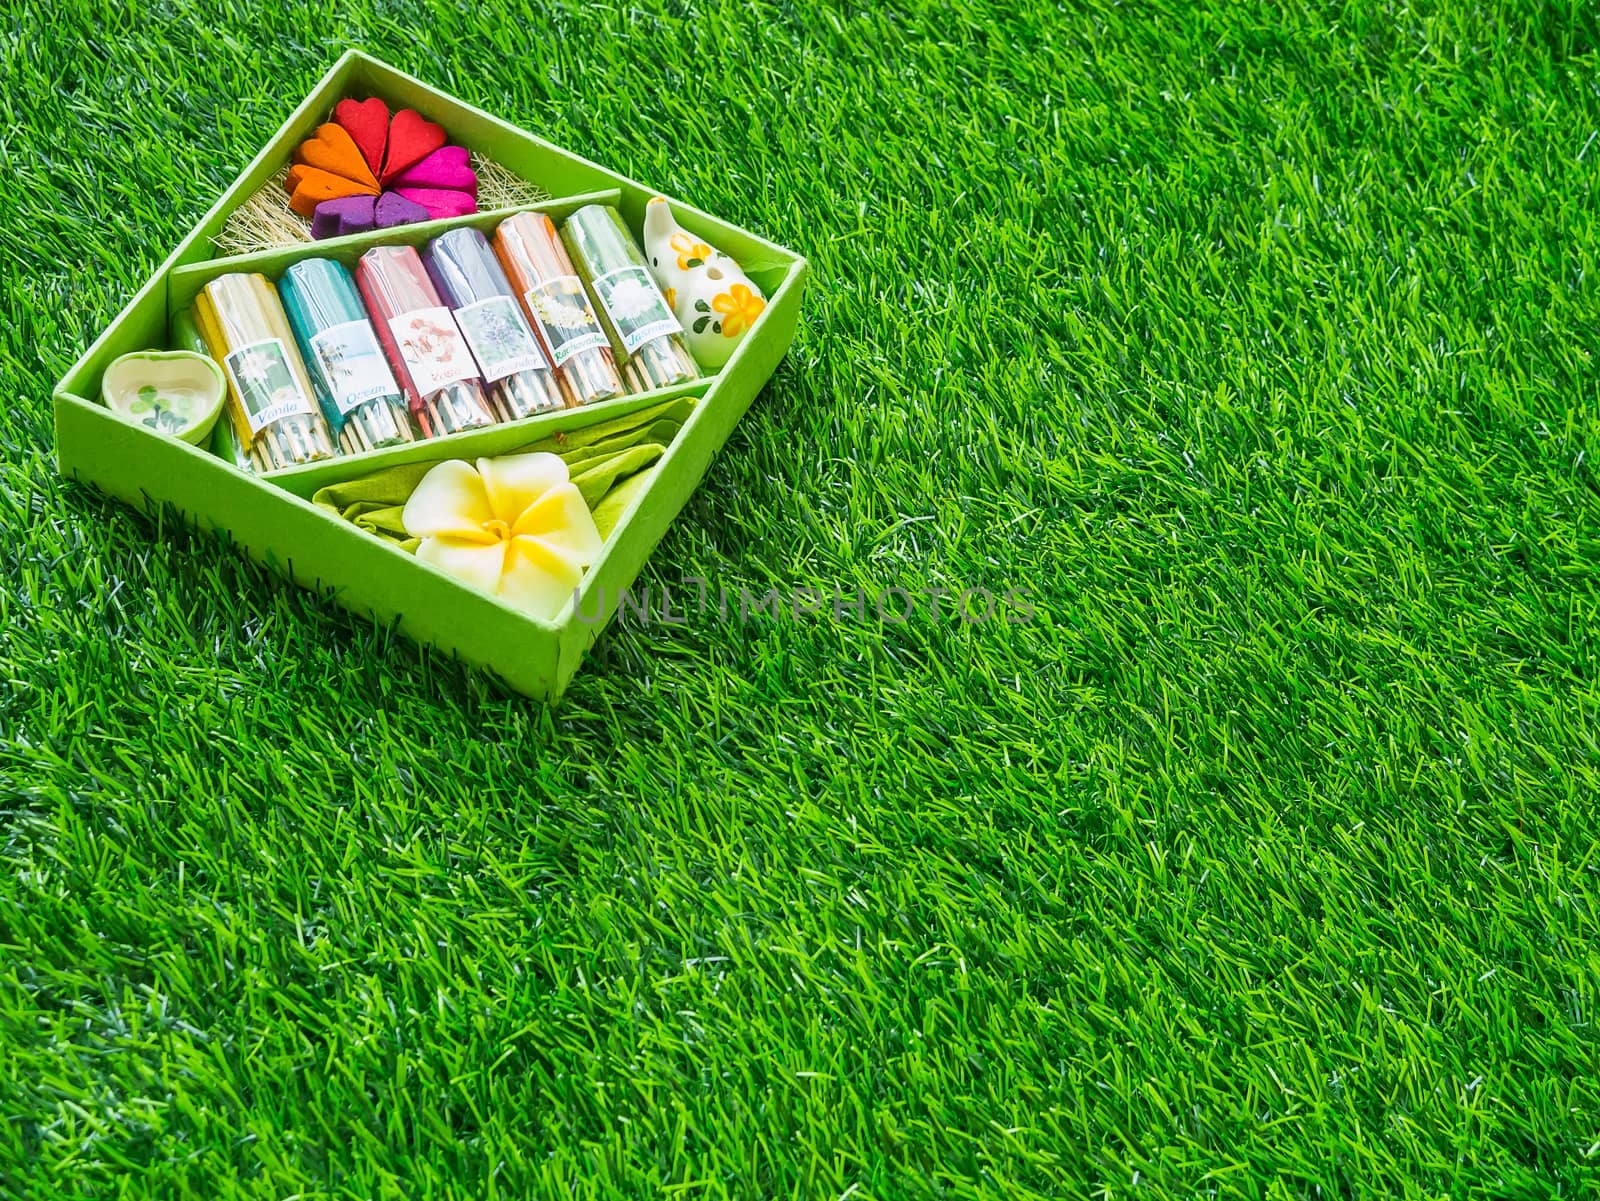 An incense set is placed on a green lawn.